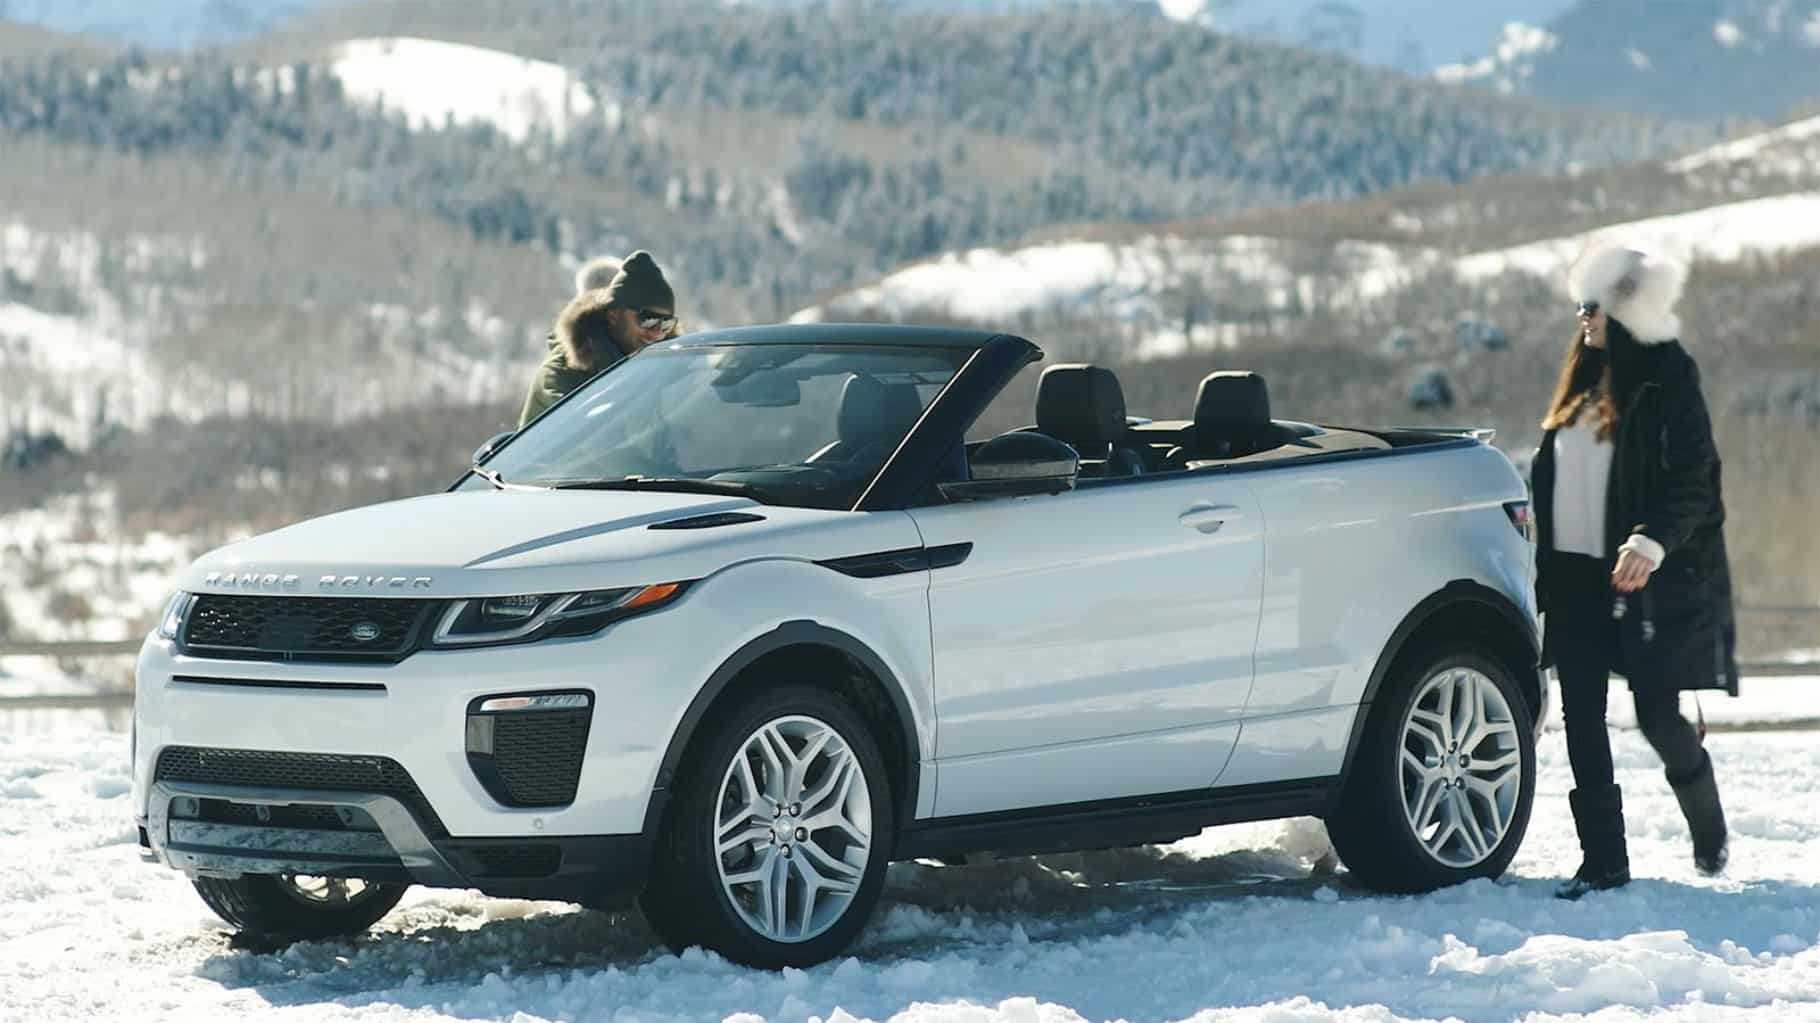 Range Rover Evoque Convertible top down on snow with driver and passenger getting into vehicle.